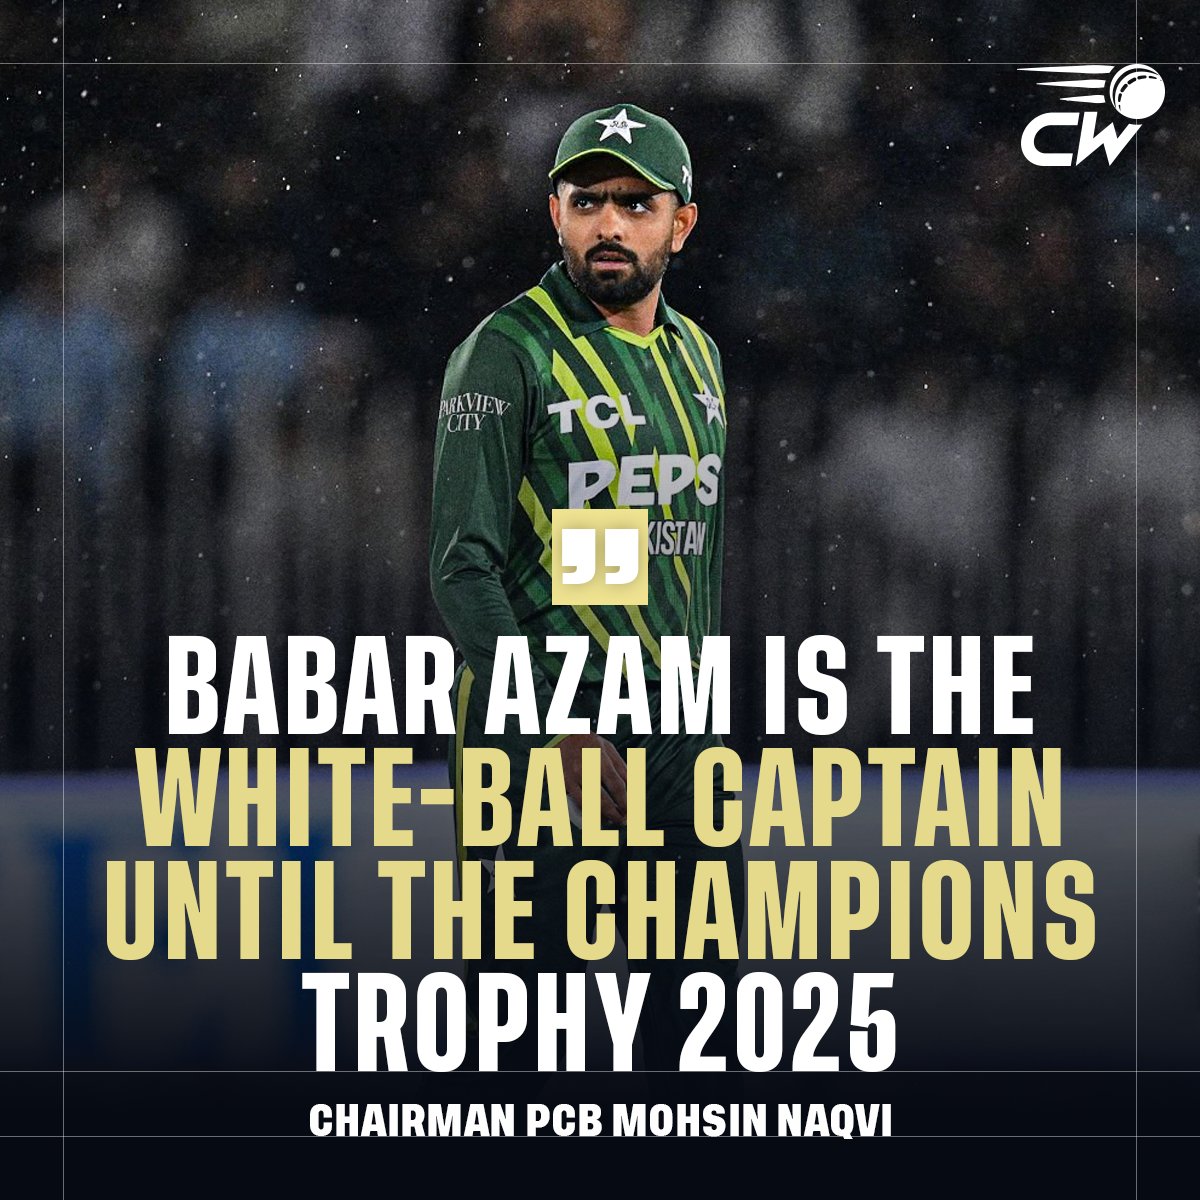 'Babar Azam will remain the white-ball captain until the Champions Trophy 2025, and the selection committee will make a decision afterwards.'

Chairman PCB Mohsin Naqvi